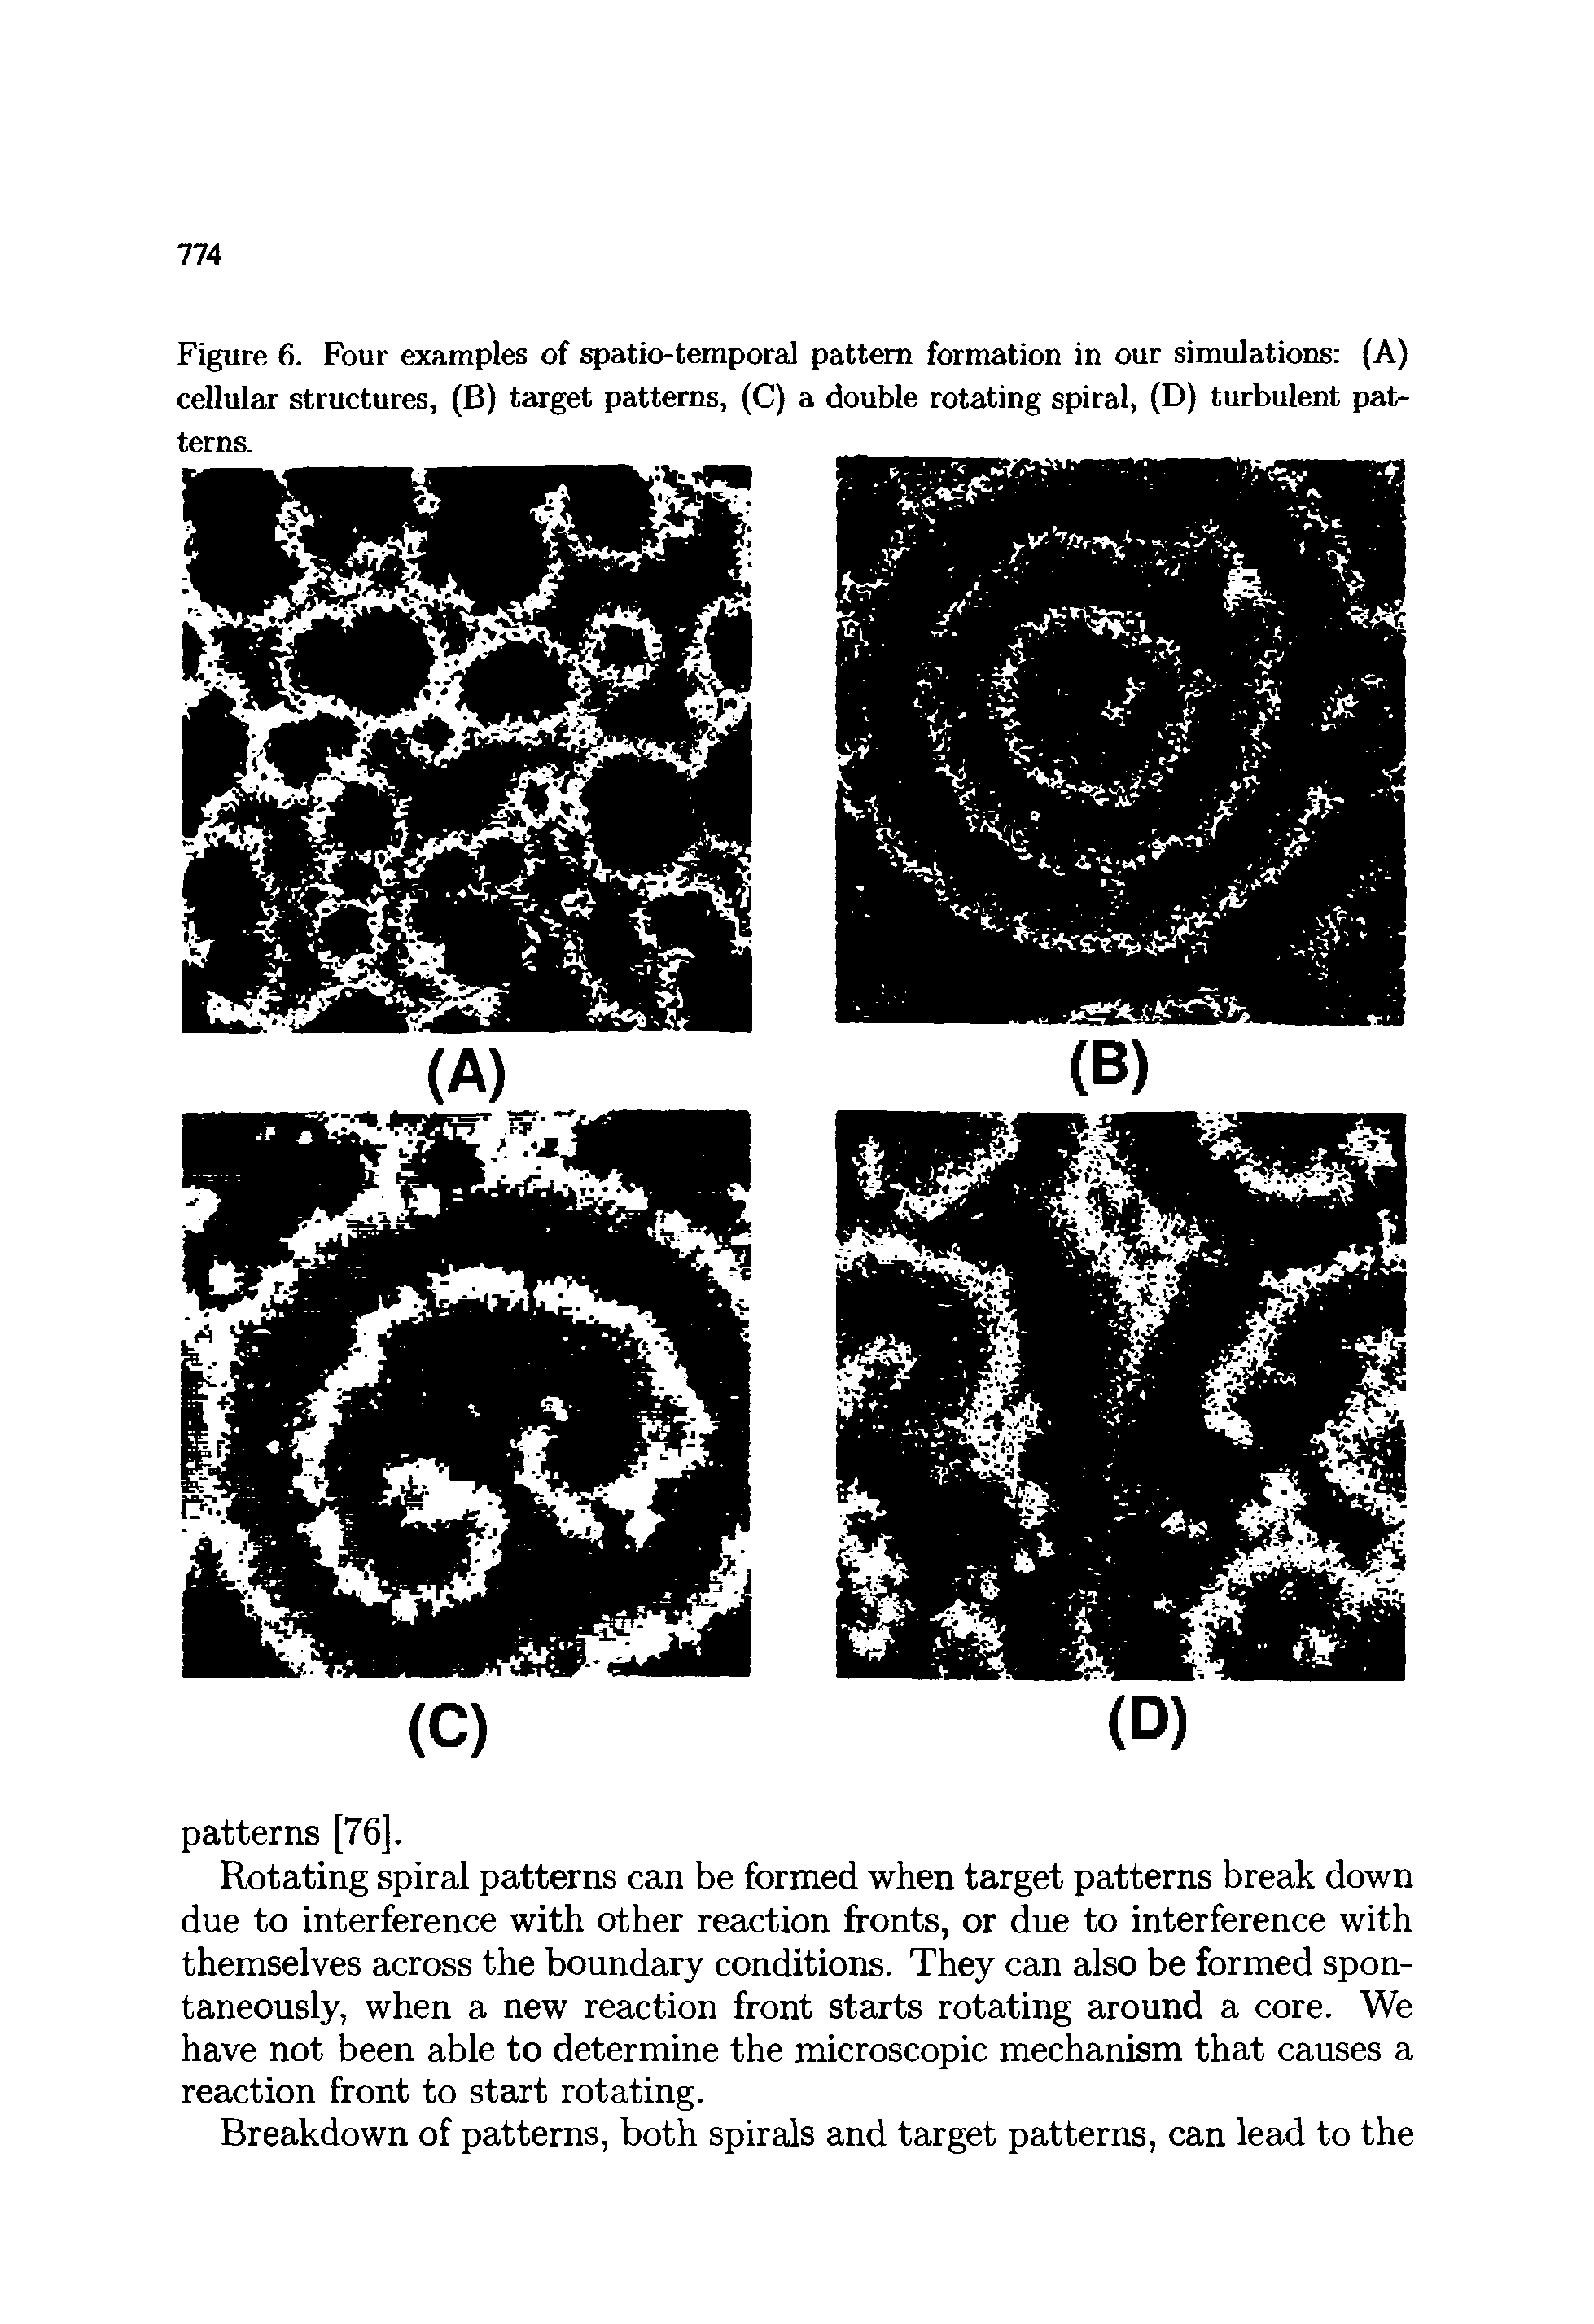 Figure 6. Four examples of spatio-temporal pattern formation in our simulations (A) cellular structures, (B) target patterns, (C) a double rotating spiral, (D) turbulent patterns.